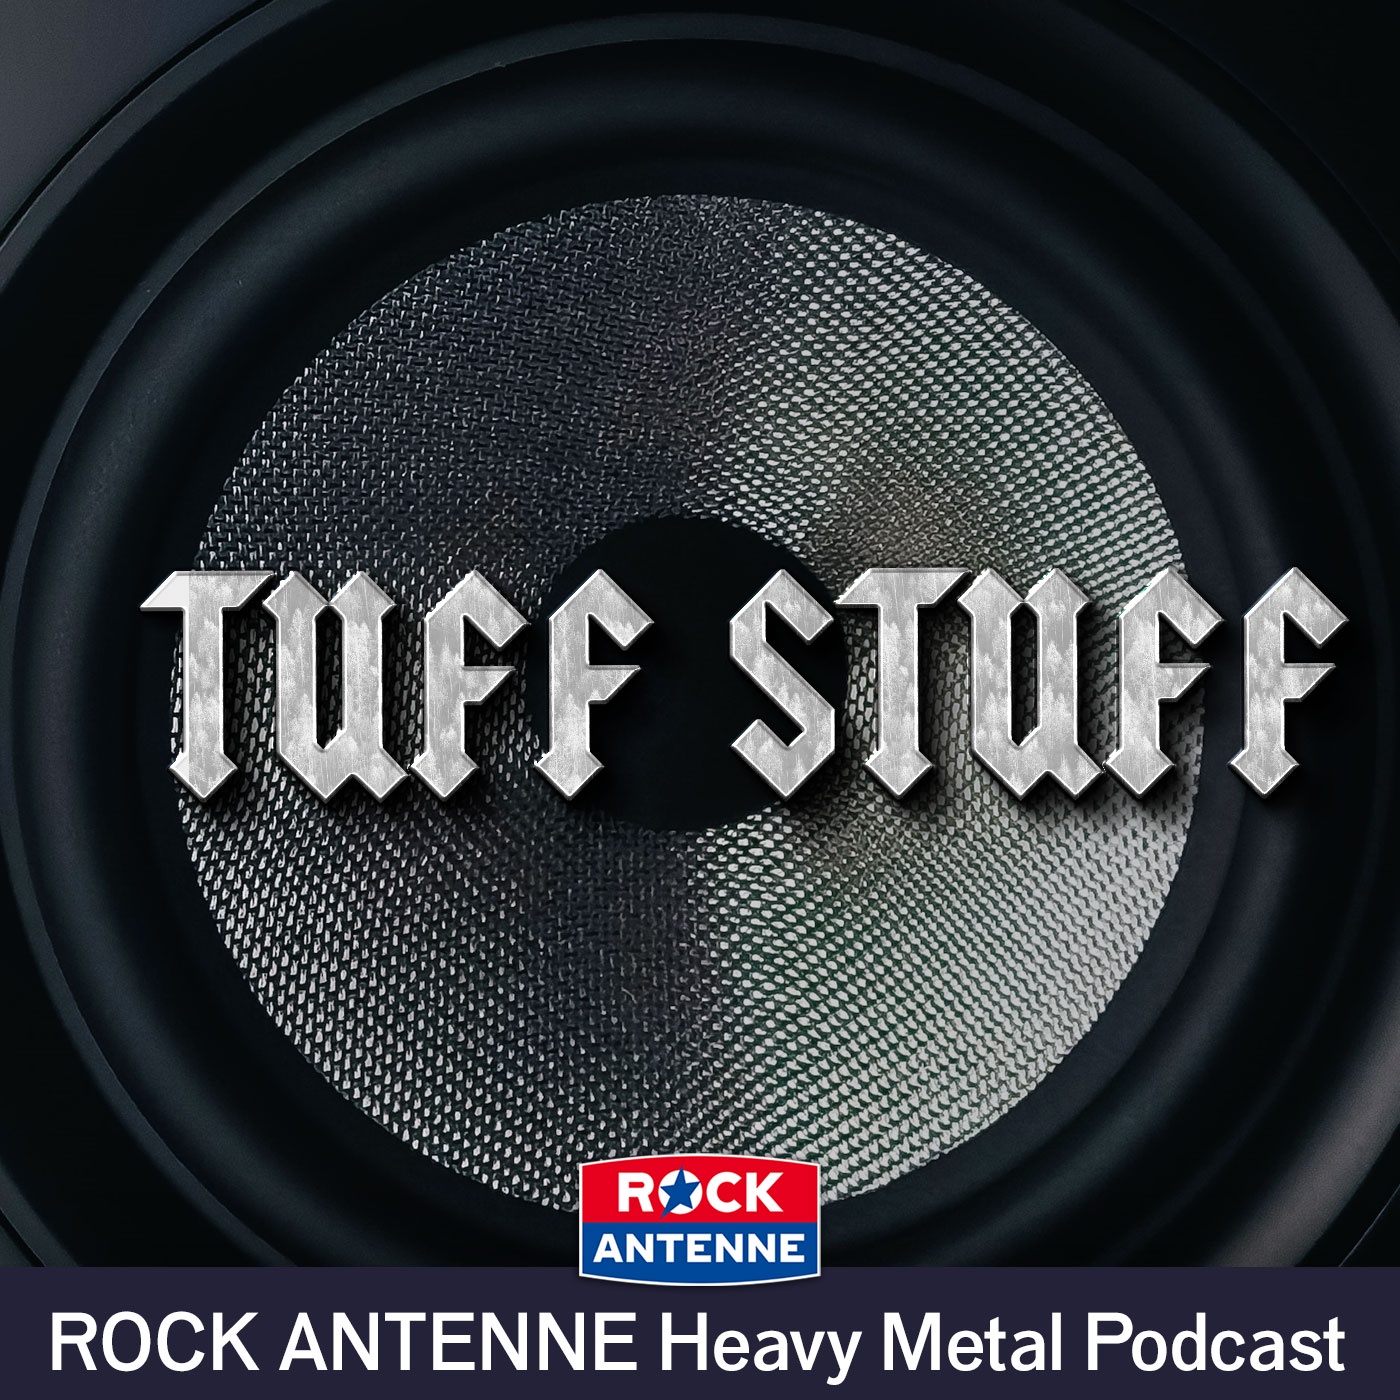 Tuff Stuff - The ROCK ANTENNE Heavy Metal Interview Podcast